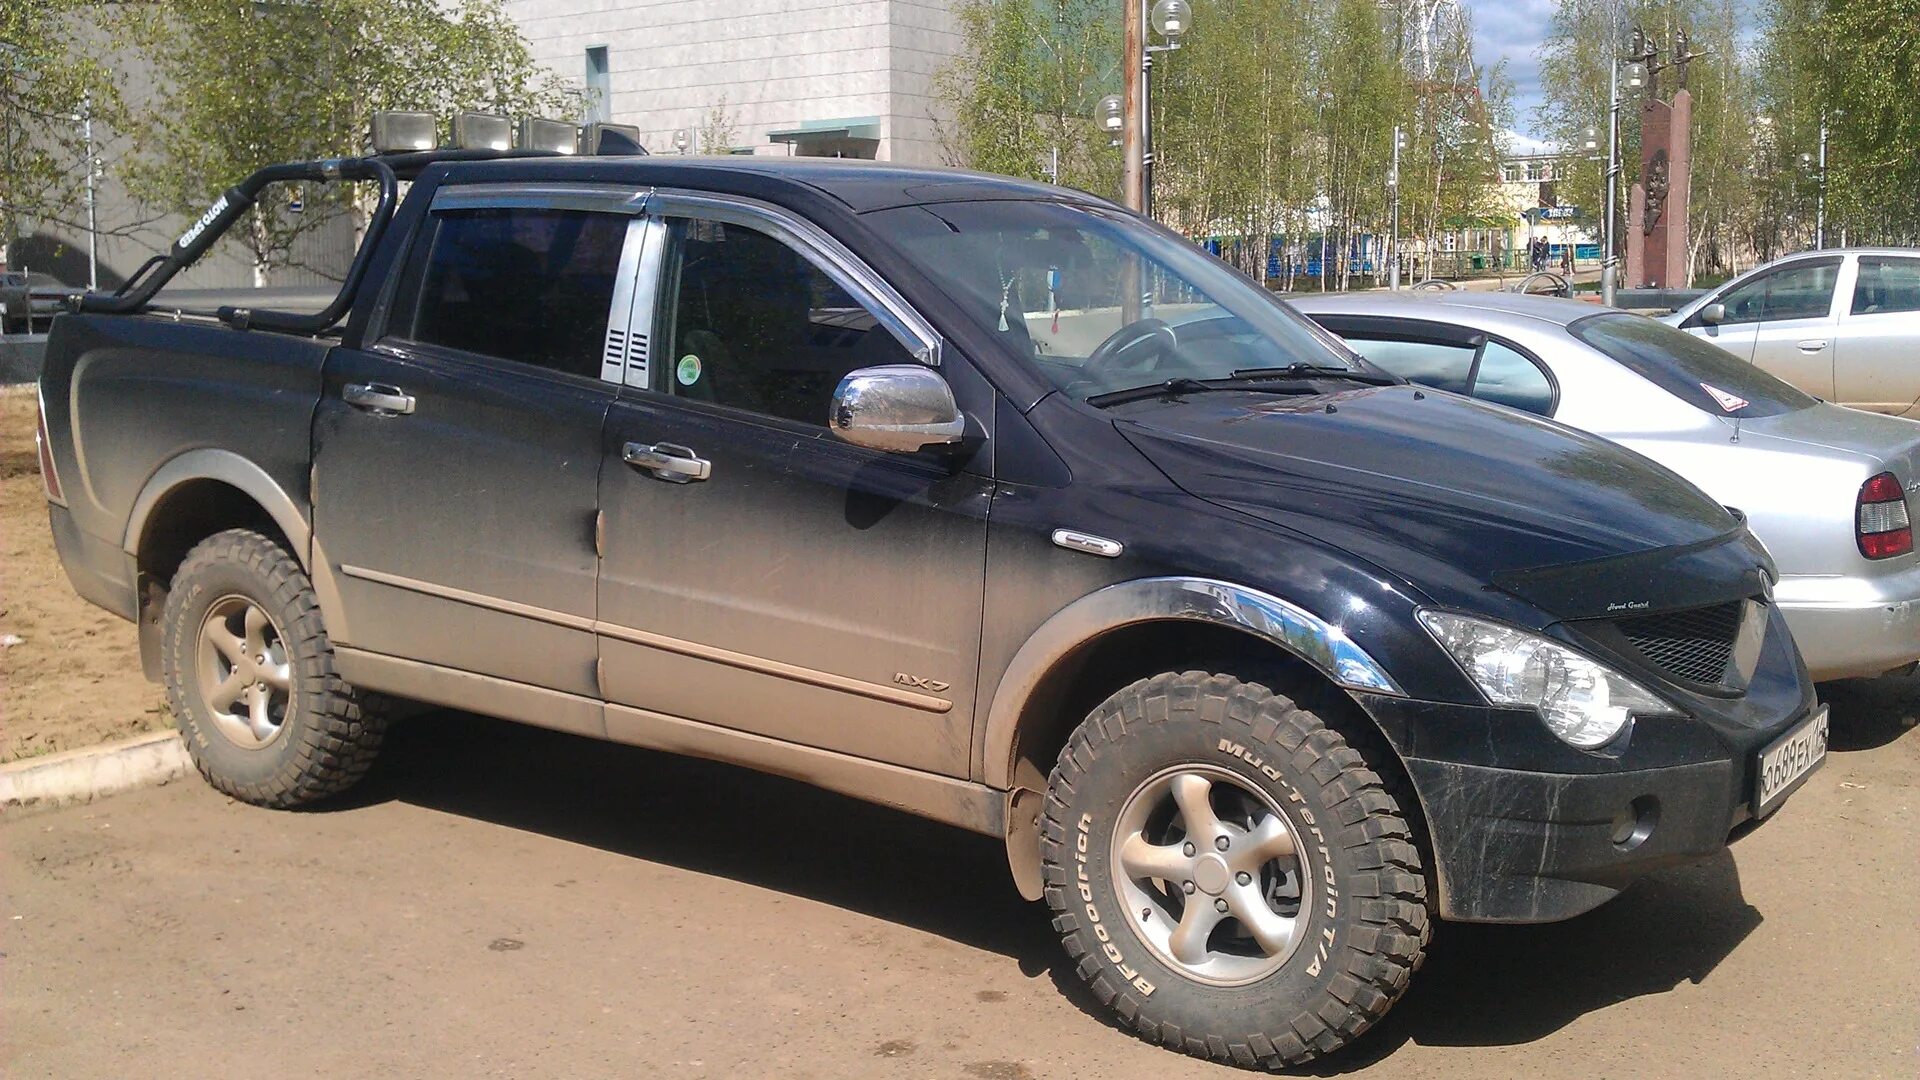 Actyon полный привод. SSANGYONG Actyon Sports 2010. SSANGYONG Actyon Sports 265/75/16. SSANGYONG Actyon 2 полный привод. Edtkbxtybt rkbhtycf Ssang Yong Action Sport.